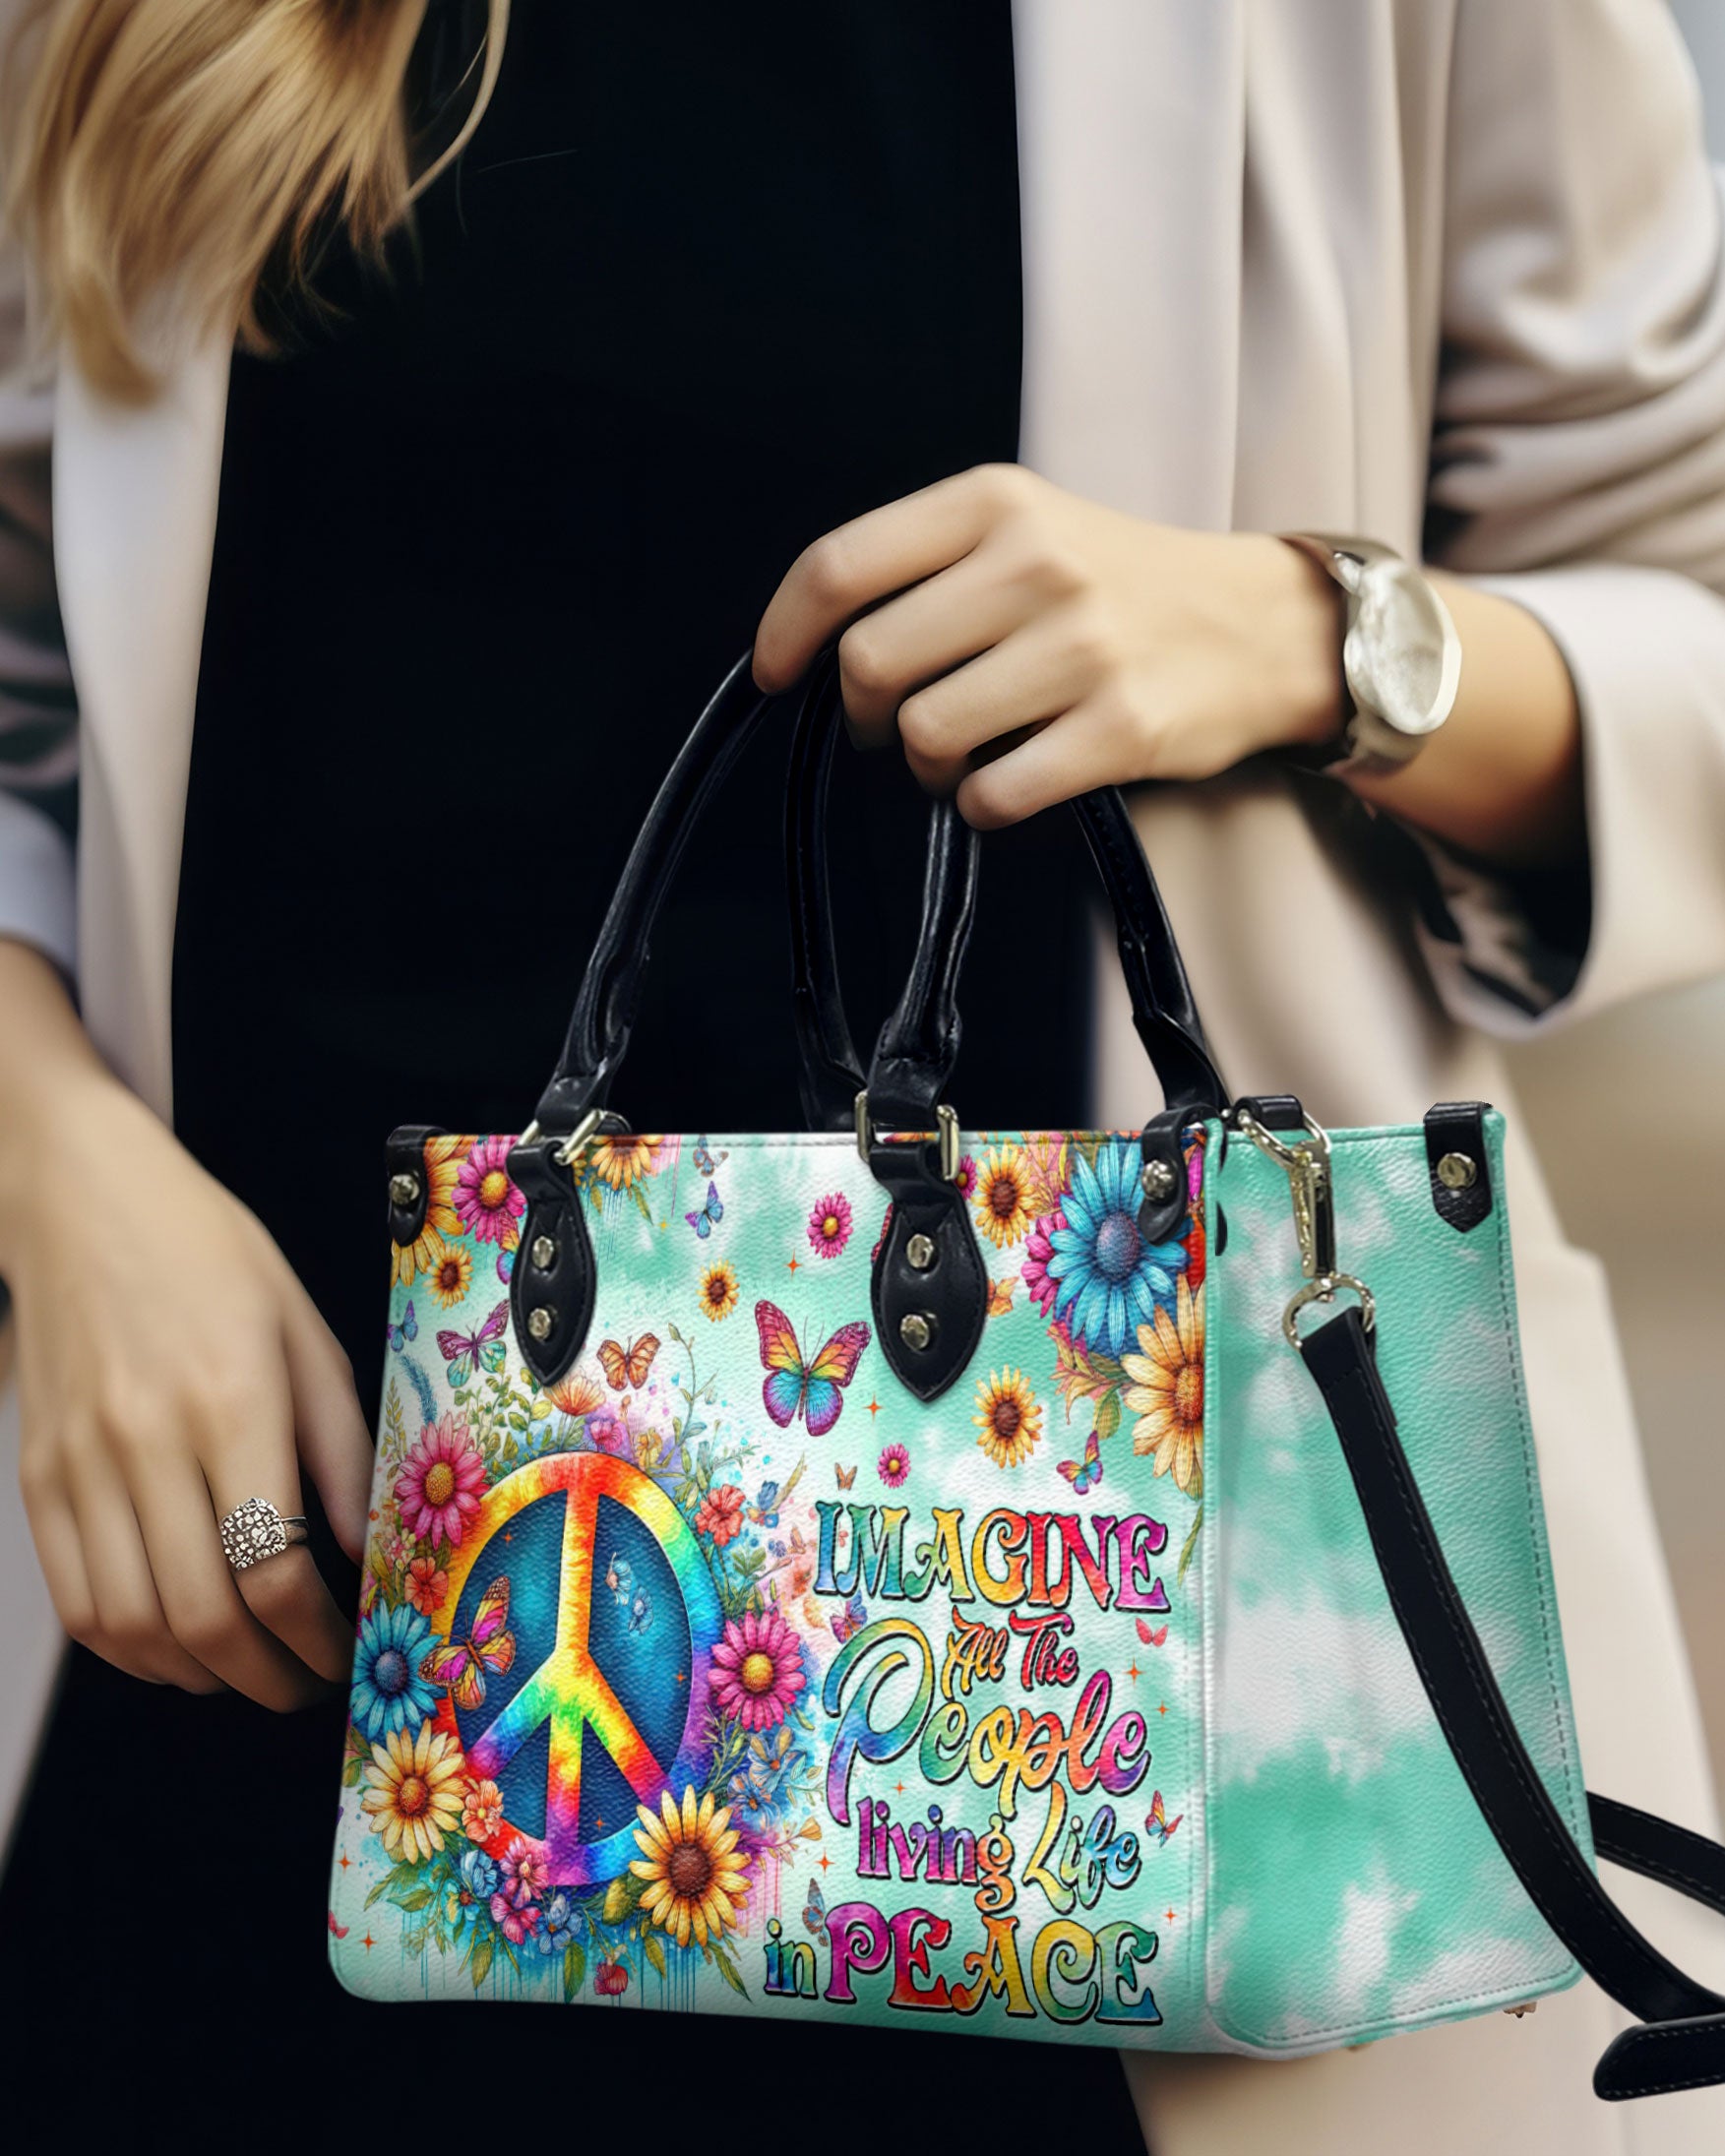 IMAGINE ALL THE PEOPLE LIVING LIFE IN PEACE LEATHER HANDBAG - TYTM2905241